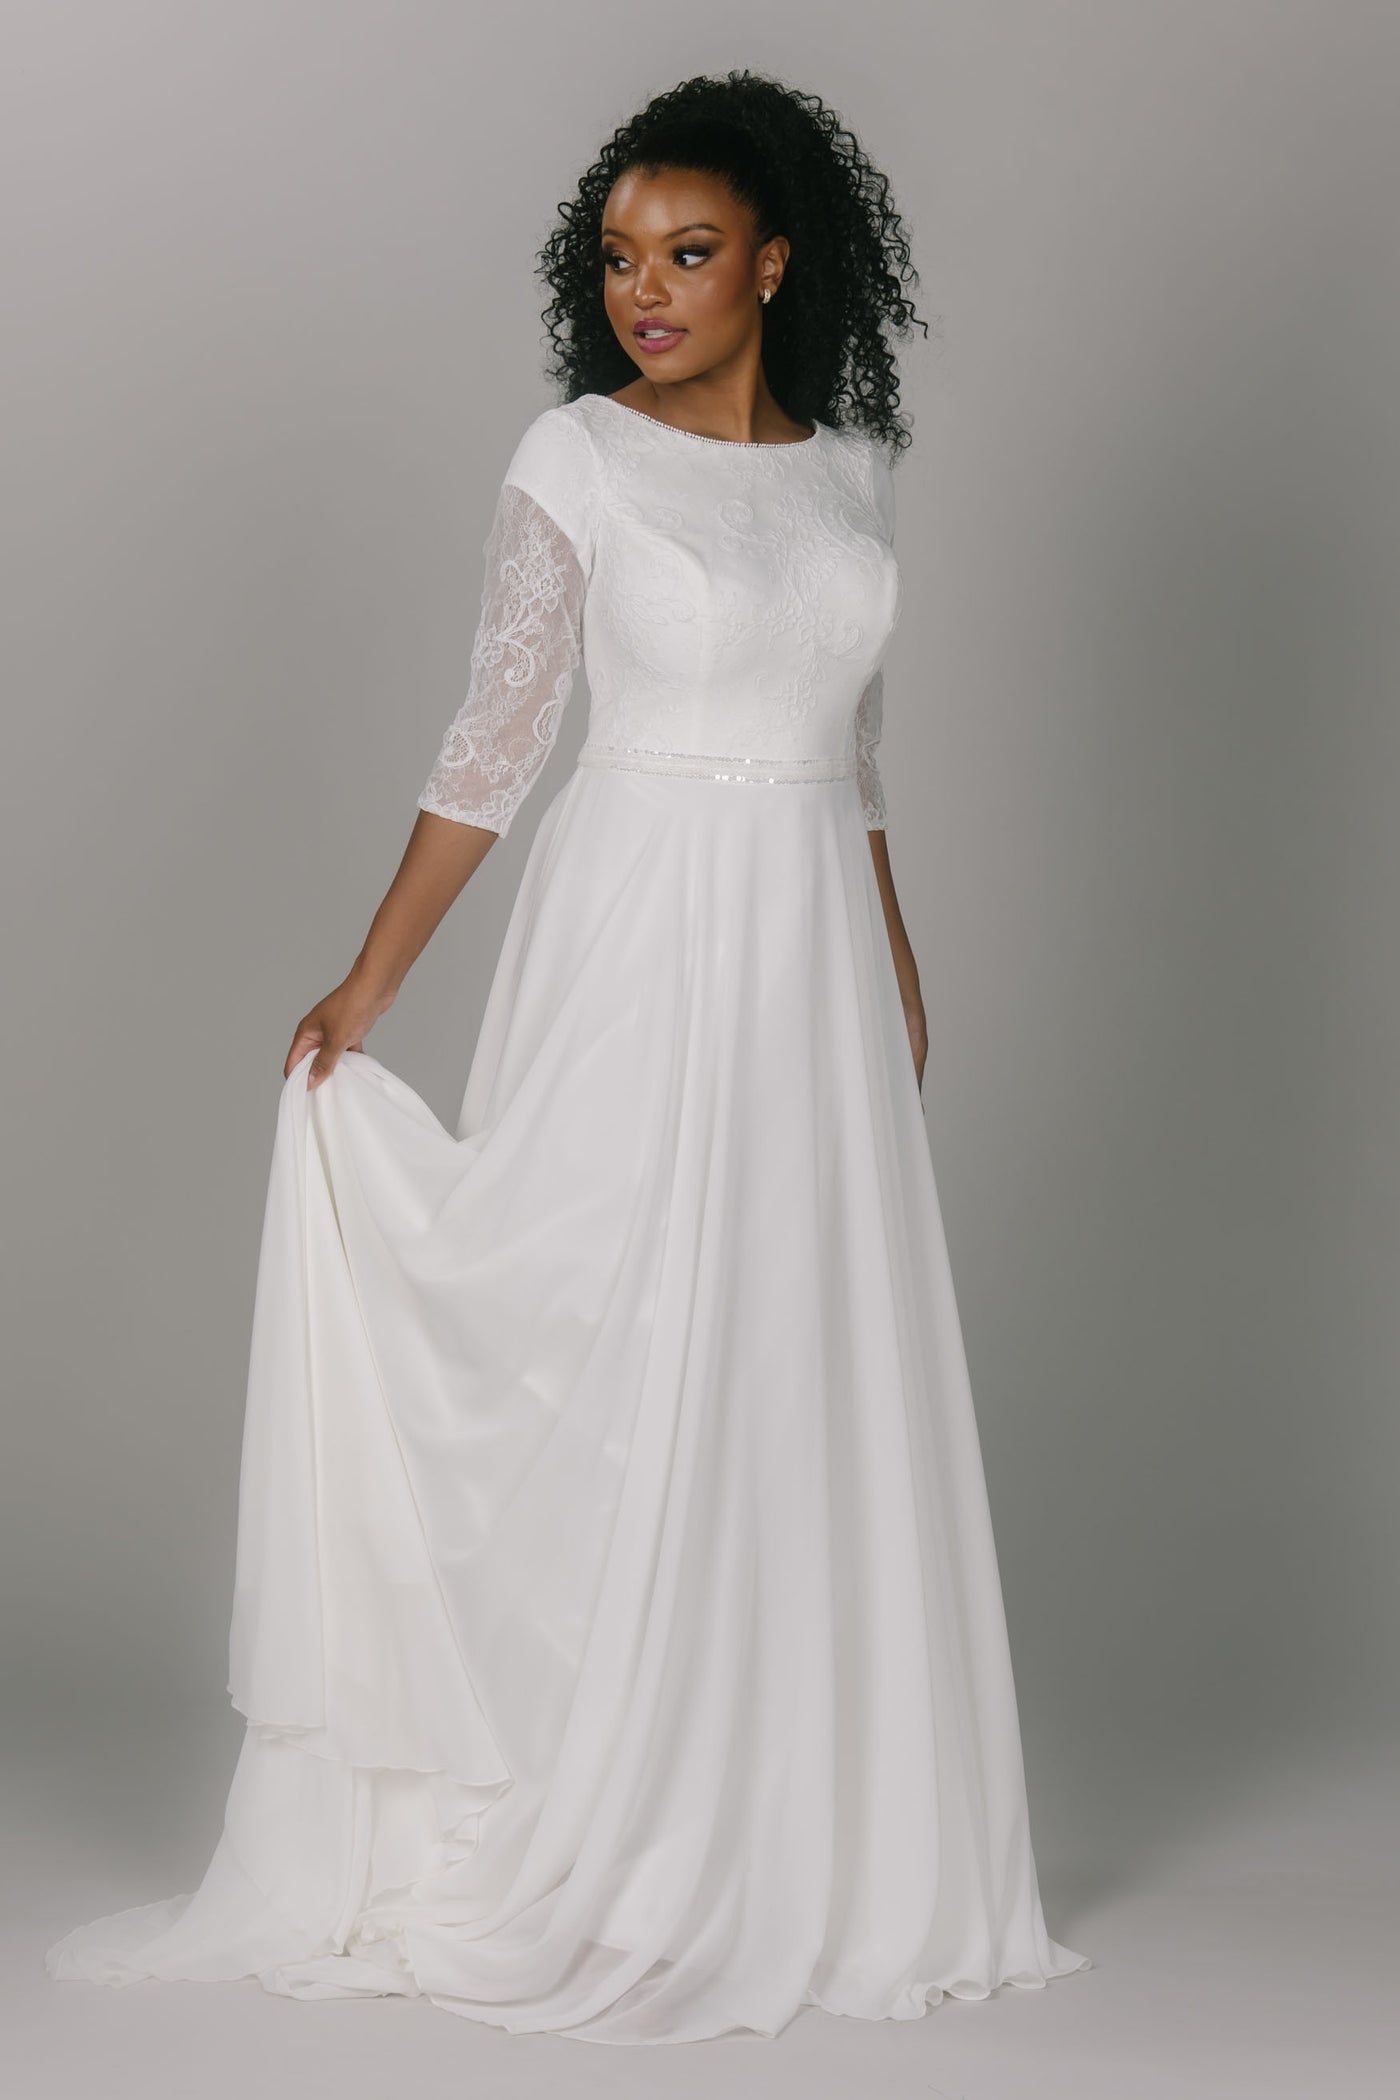 Modest wedding dress featuring a lace top and chiffon bottom. It has a high scoop neckline and three quarter length sleeves. It has a sparkly belt and a flowy skirt. This modest wedding dress is an icon for this particular style. 